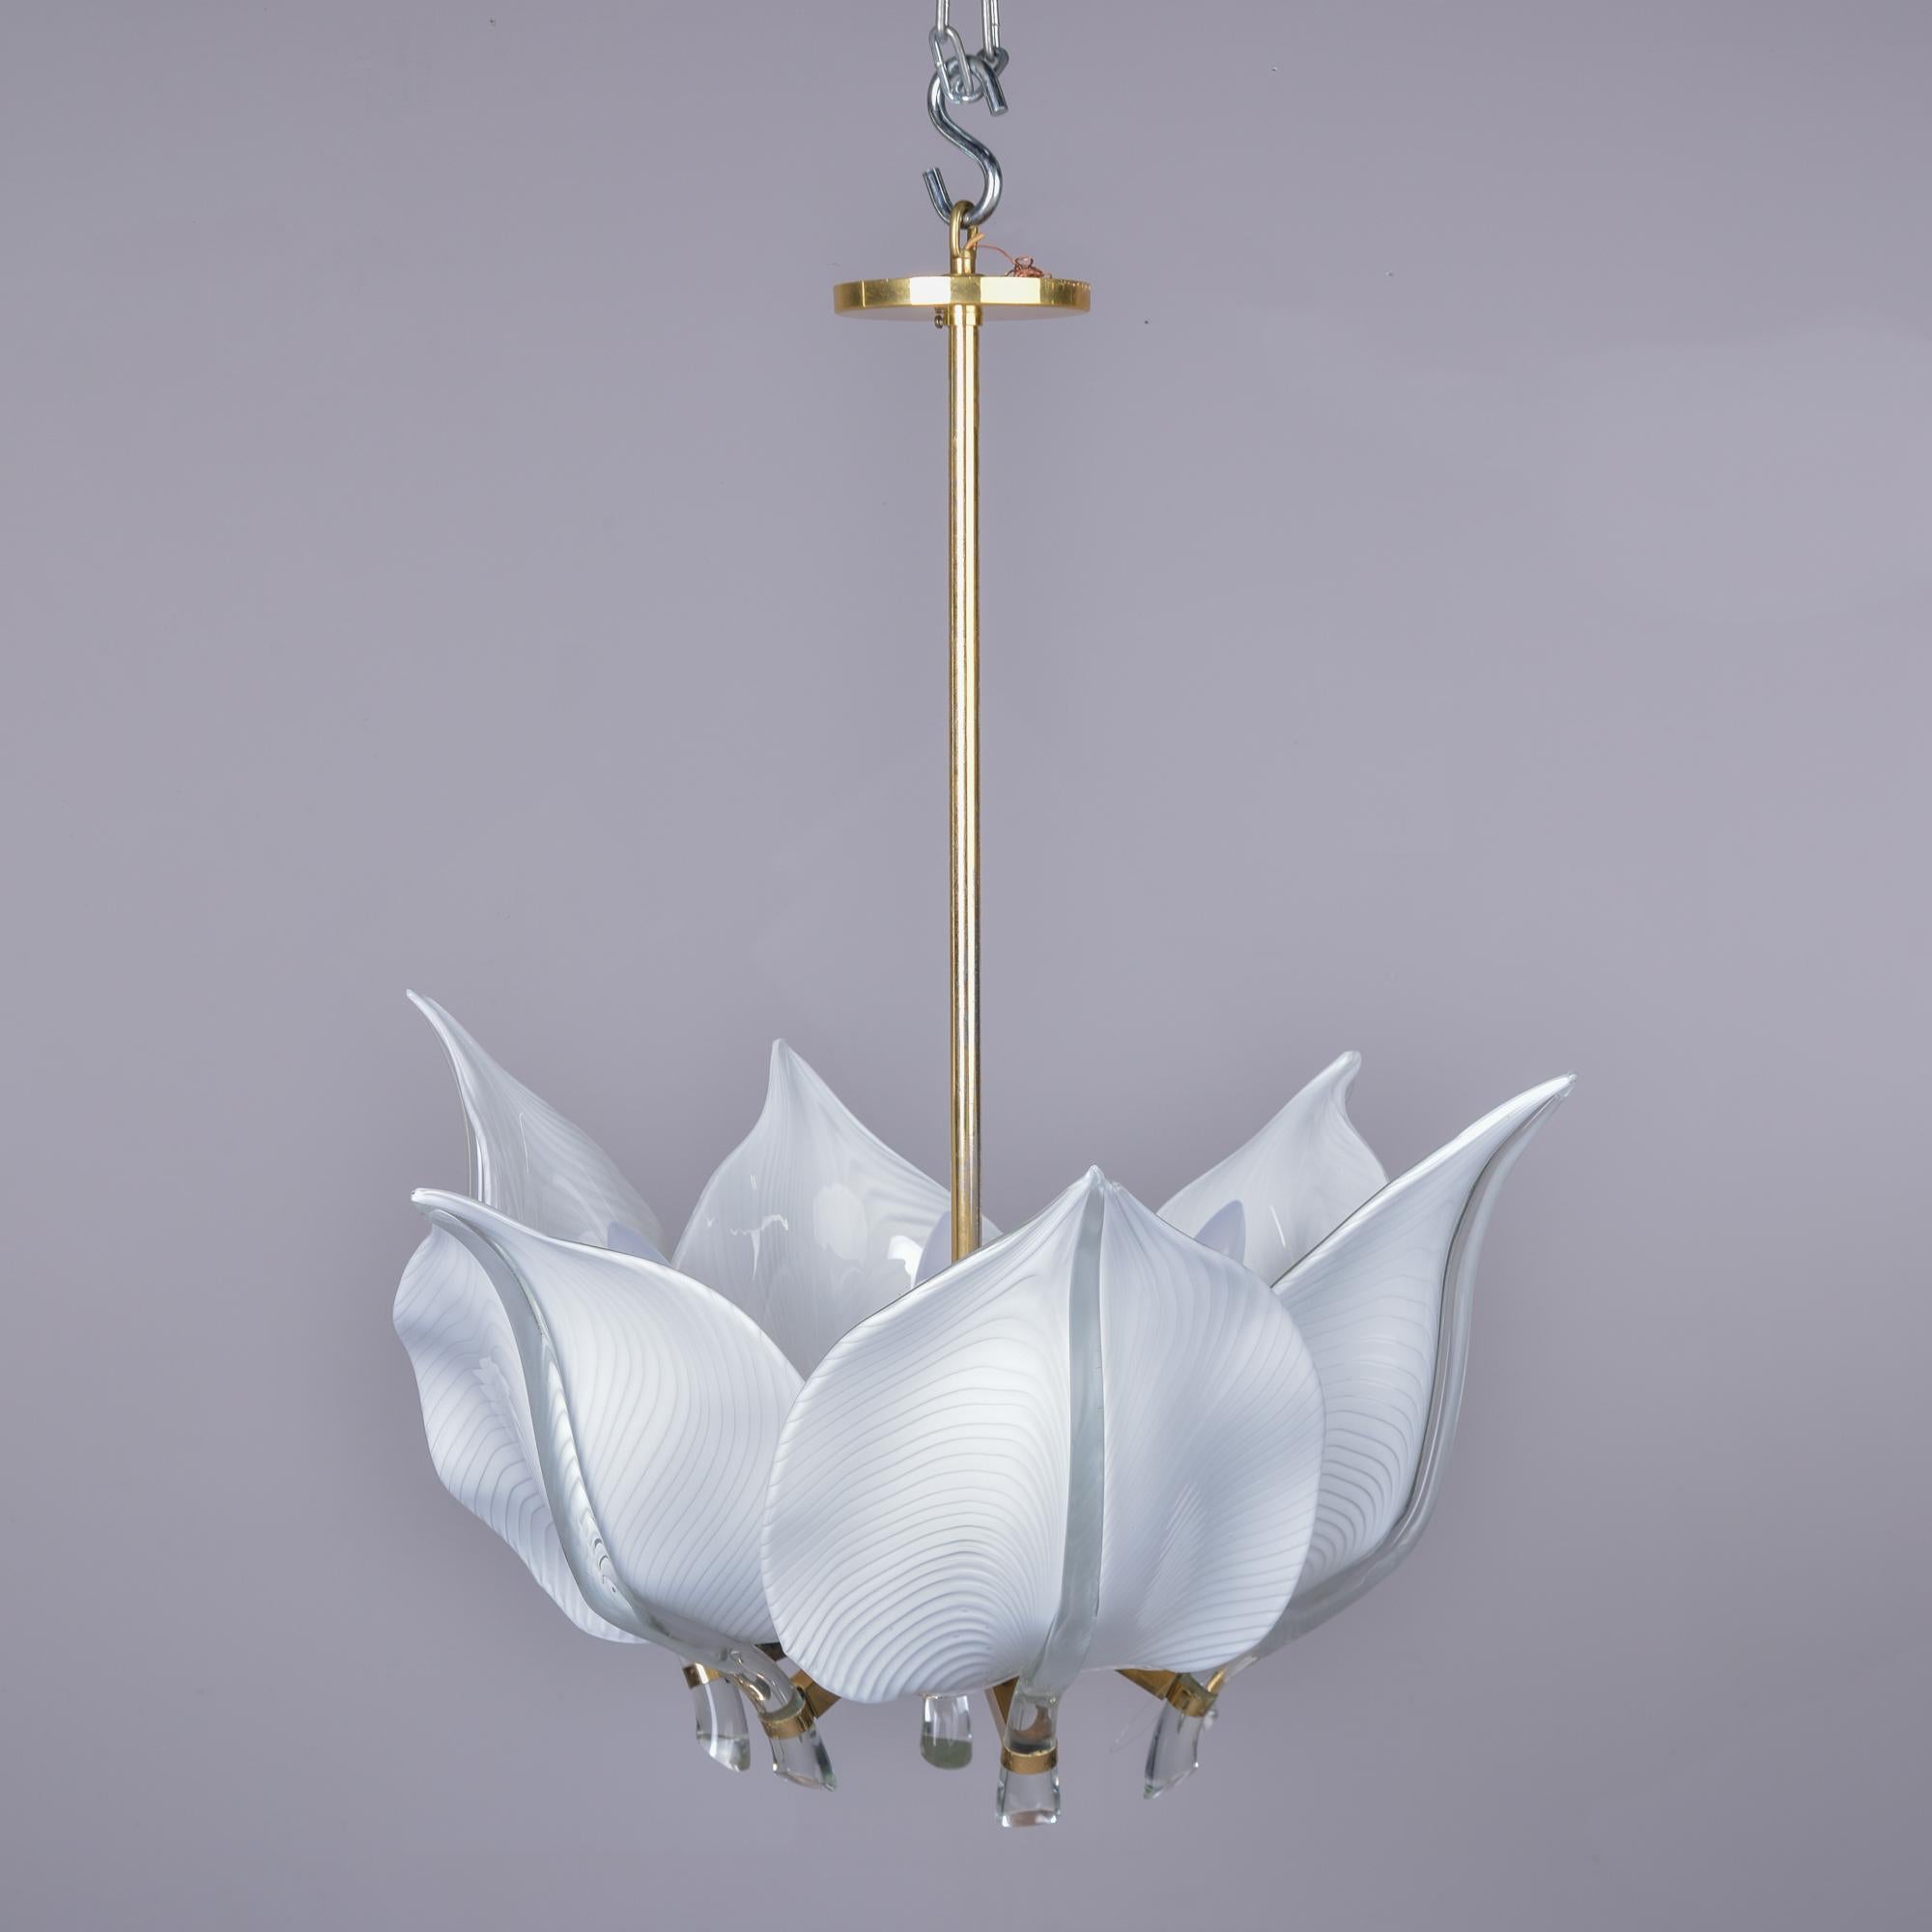 Circa 1970s Murano glass fixture designed by Franco Luce for Seguso. Polished brass frame supports six white colored mouth blown glass leaves. Fixture has six standard sized sockets.  New wiring for US electrical standards. 

Rod = 24”              